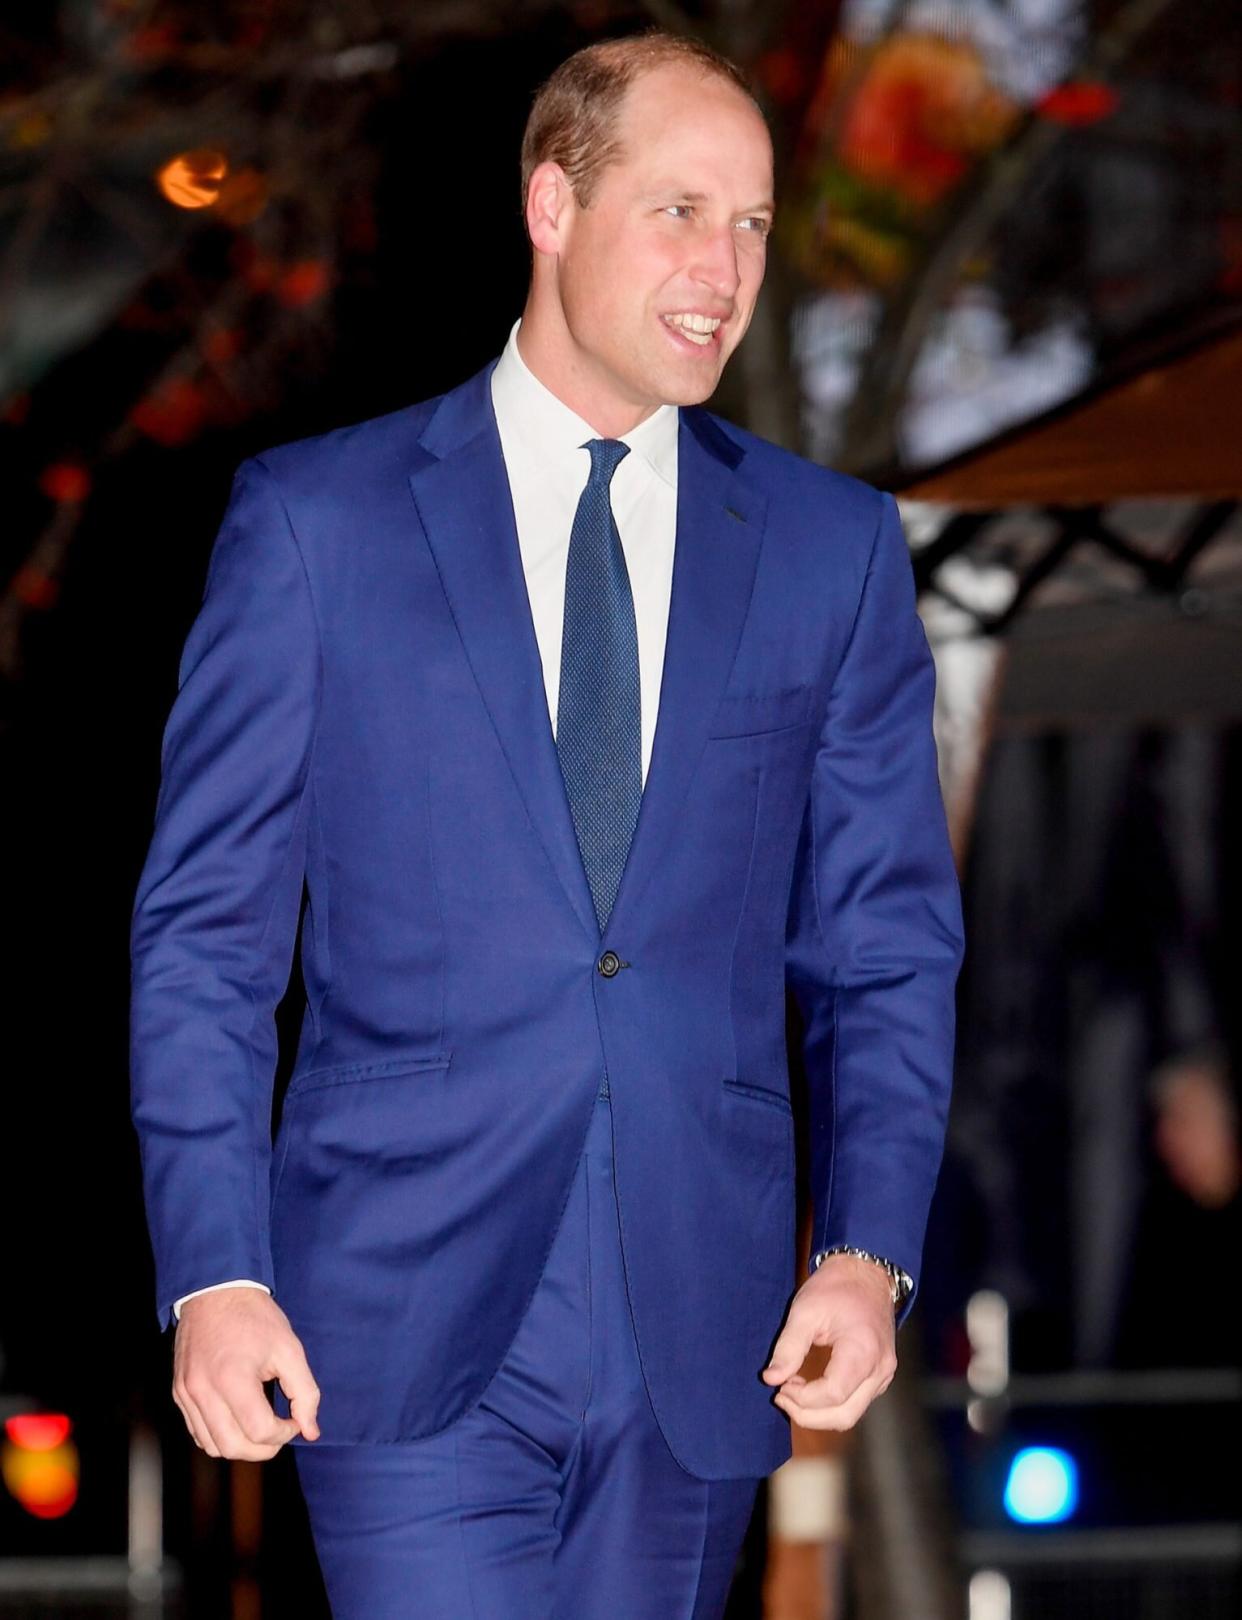 LONDON, ENGLAND - NOVEMBER 22: Prince William, Duke of Cambridge arrives at the Tusk Conservation Awards on November 22, 2021 in London, England. (Photo by Toby Melville - WPA Pool/Getty Images)